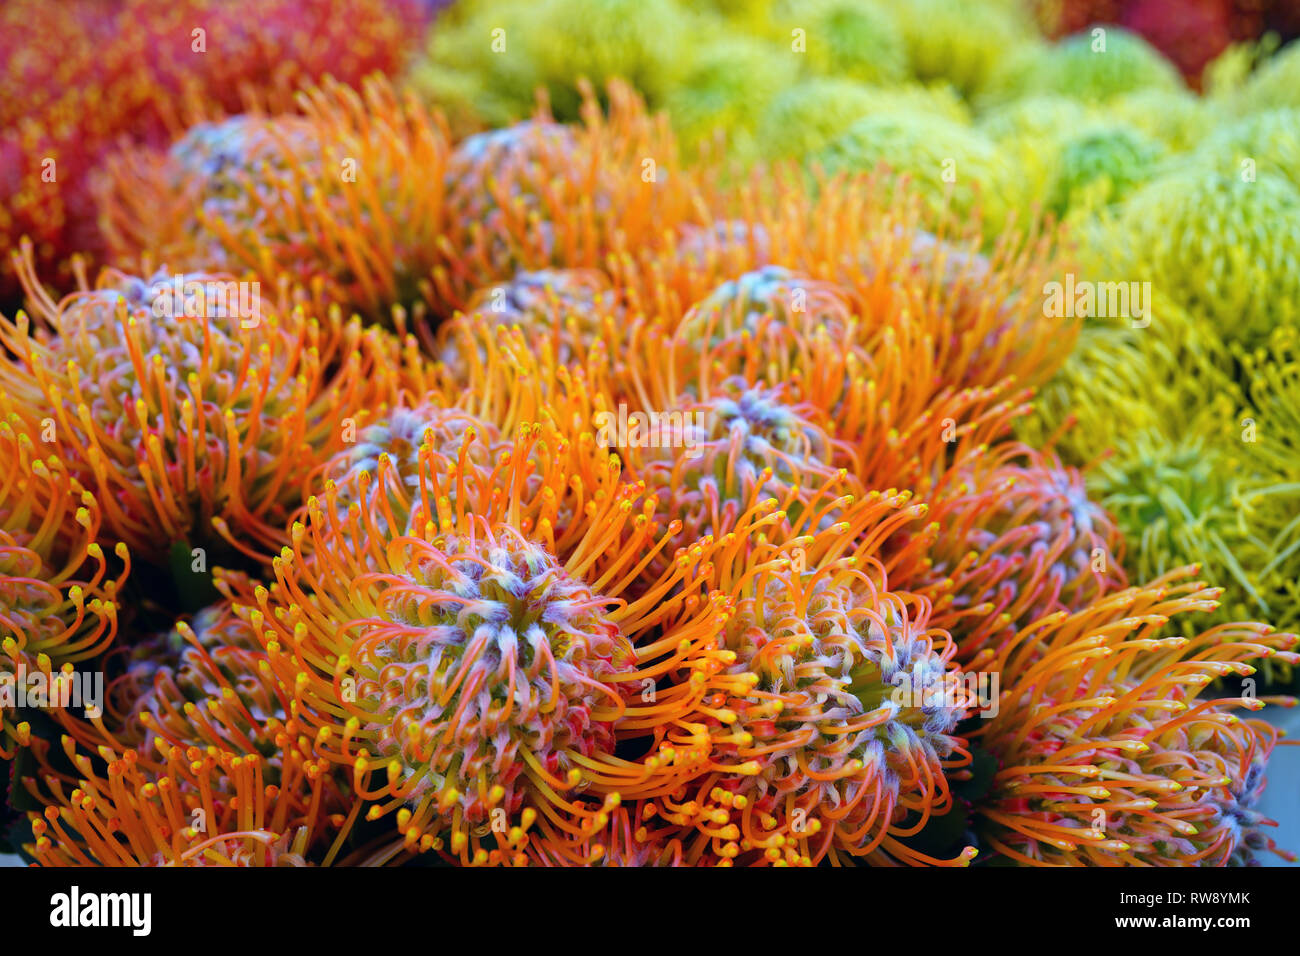 Tropical yellow and orange protea pin flowers (Leucospermum) for sale at a farmers market in Copenhagen Stock Photo